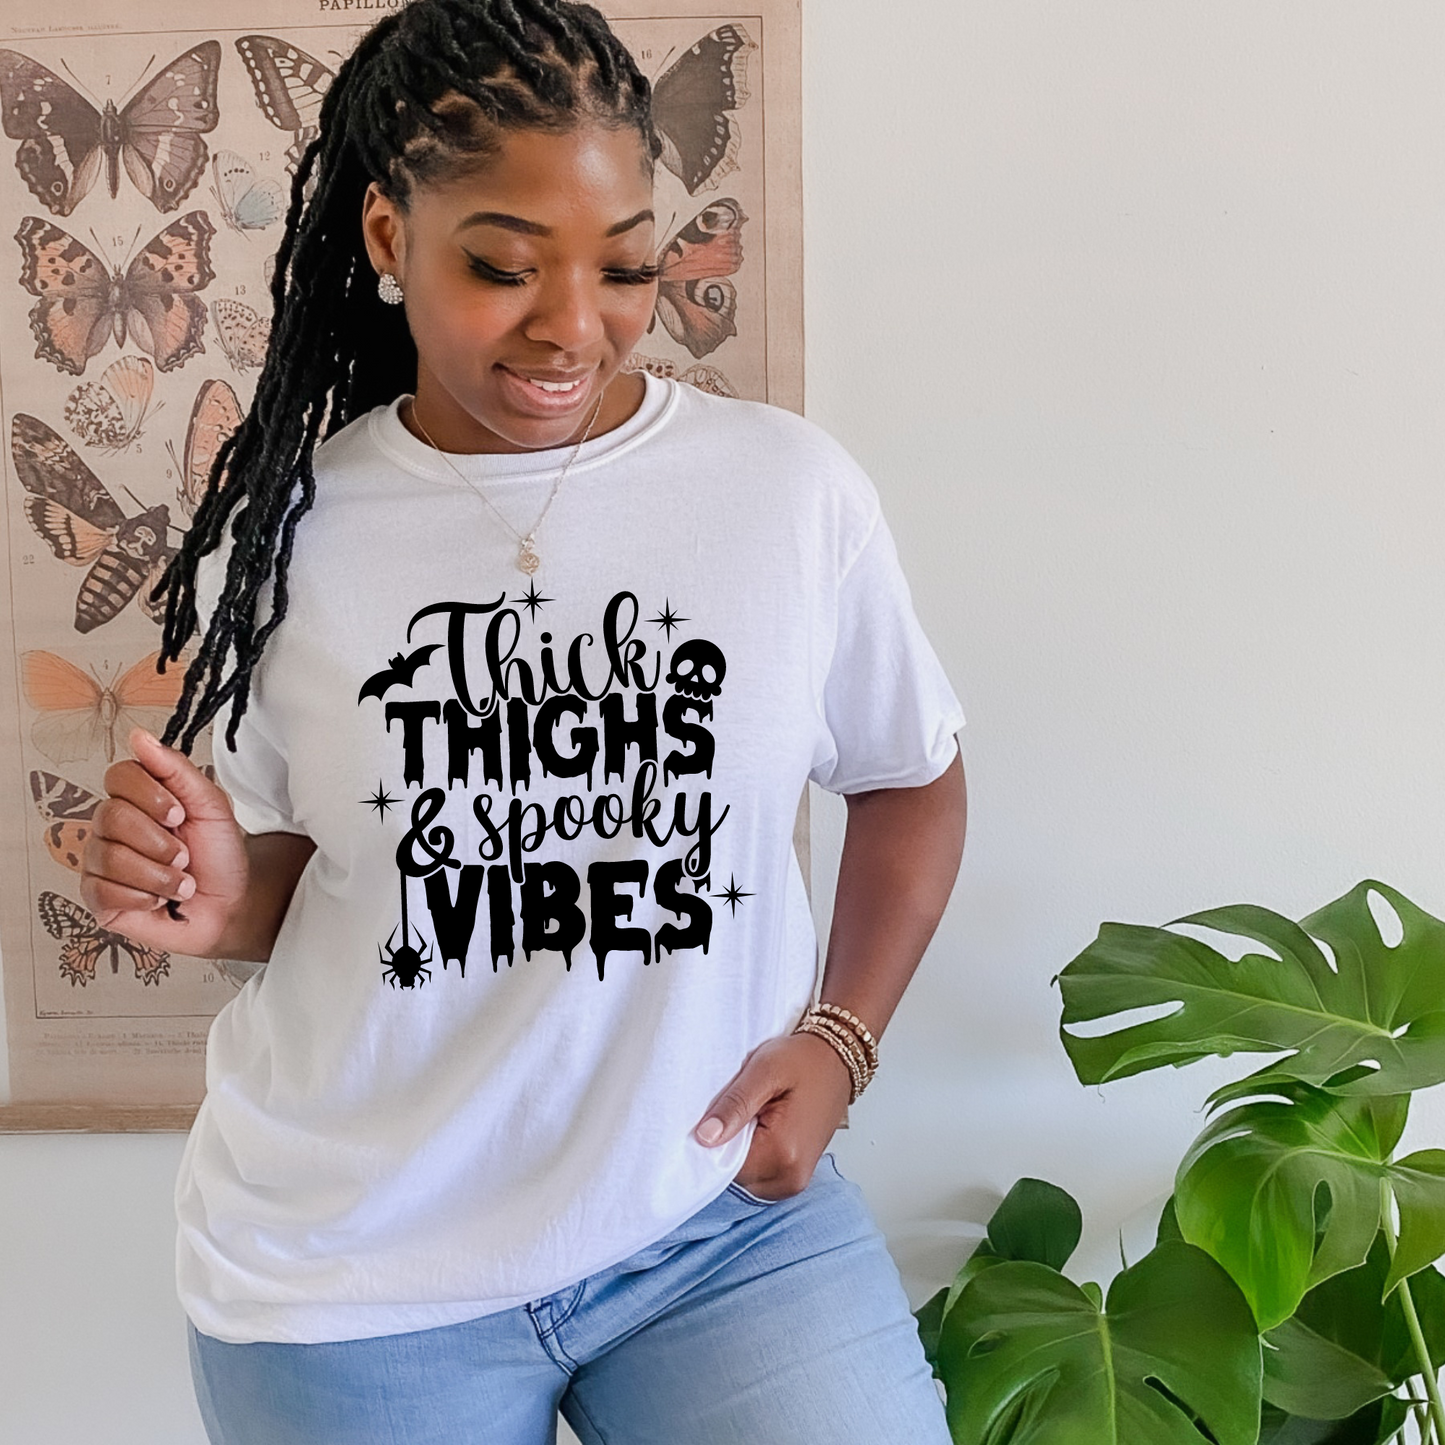 Thick Thighs and Spooky Vibes T-shirt